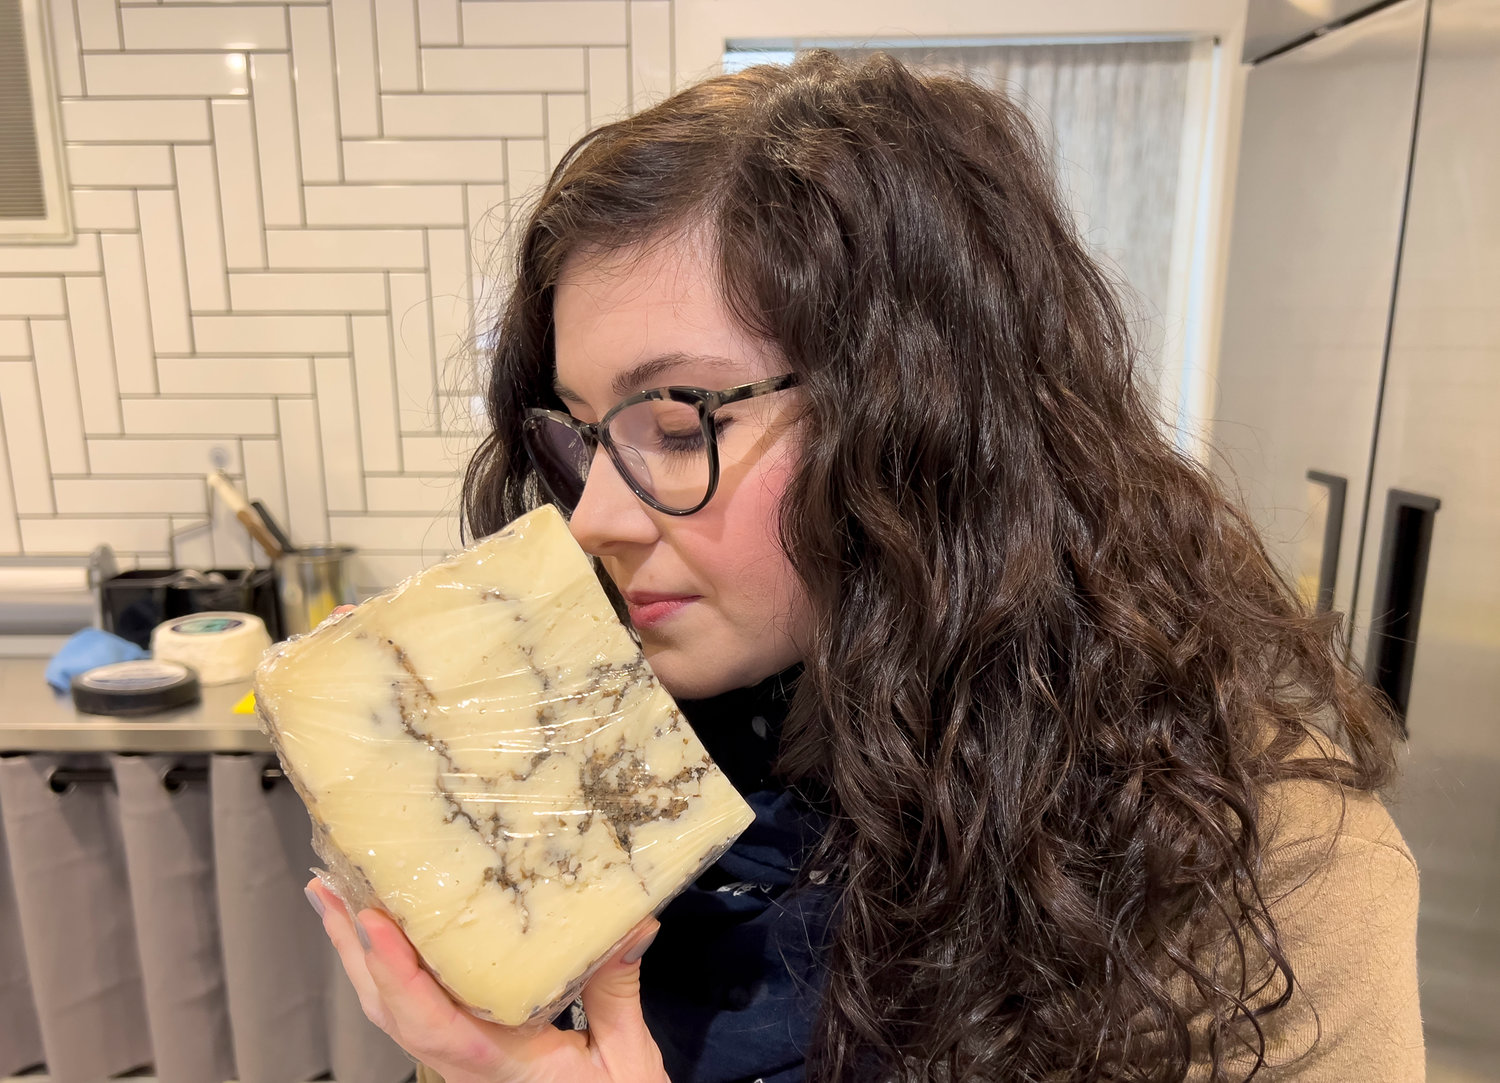 Rind owner Ashley LaPlante holds a block of Moliterno al Tartufo, a cheese that is ribboned with truffles.